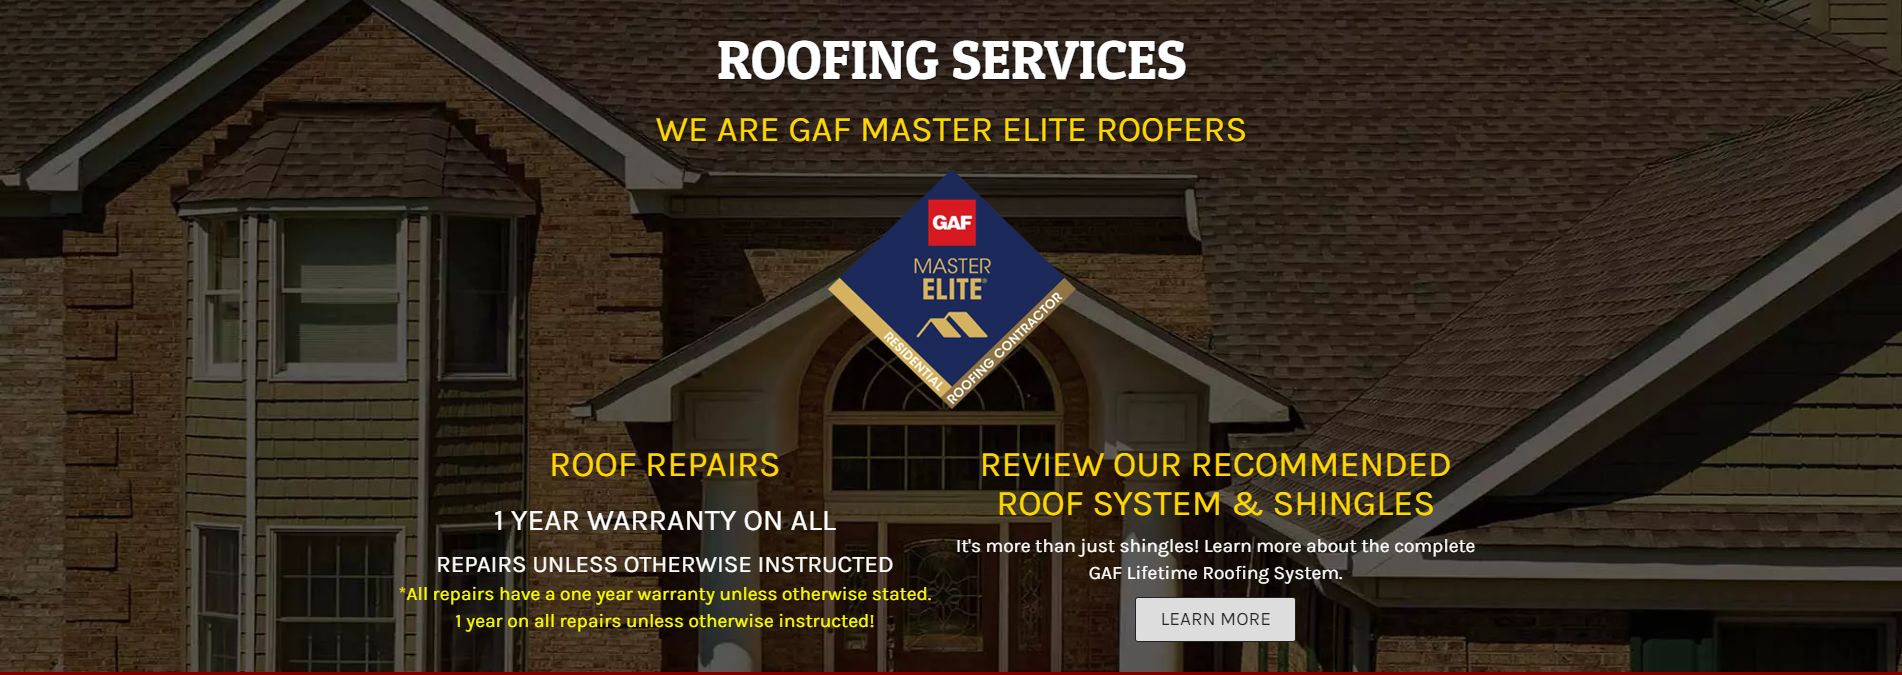 Houston New Roof - Roof Replacement Houston